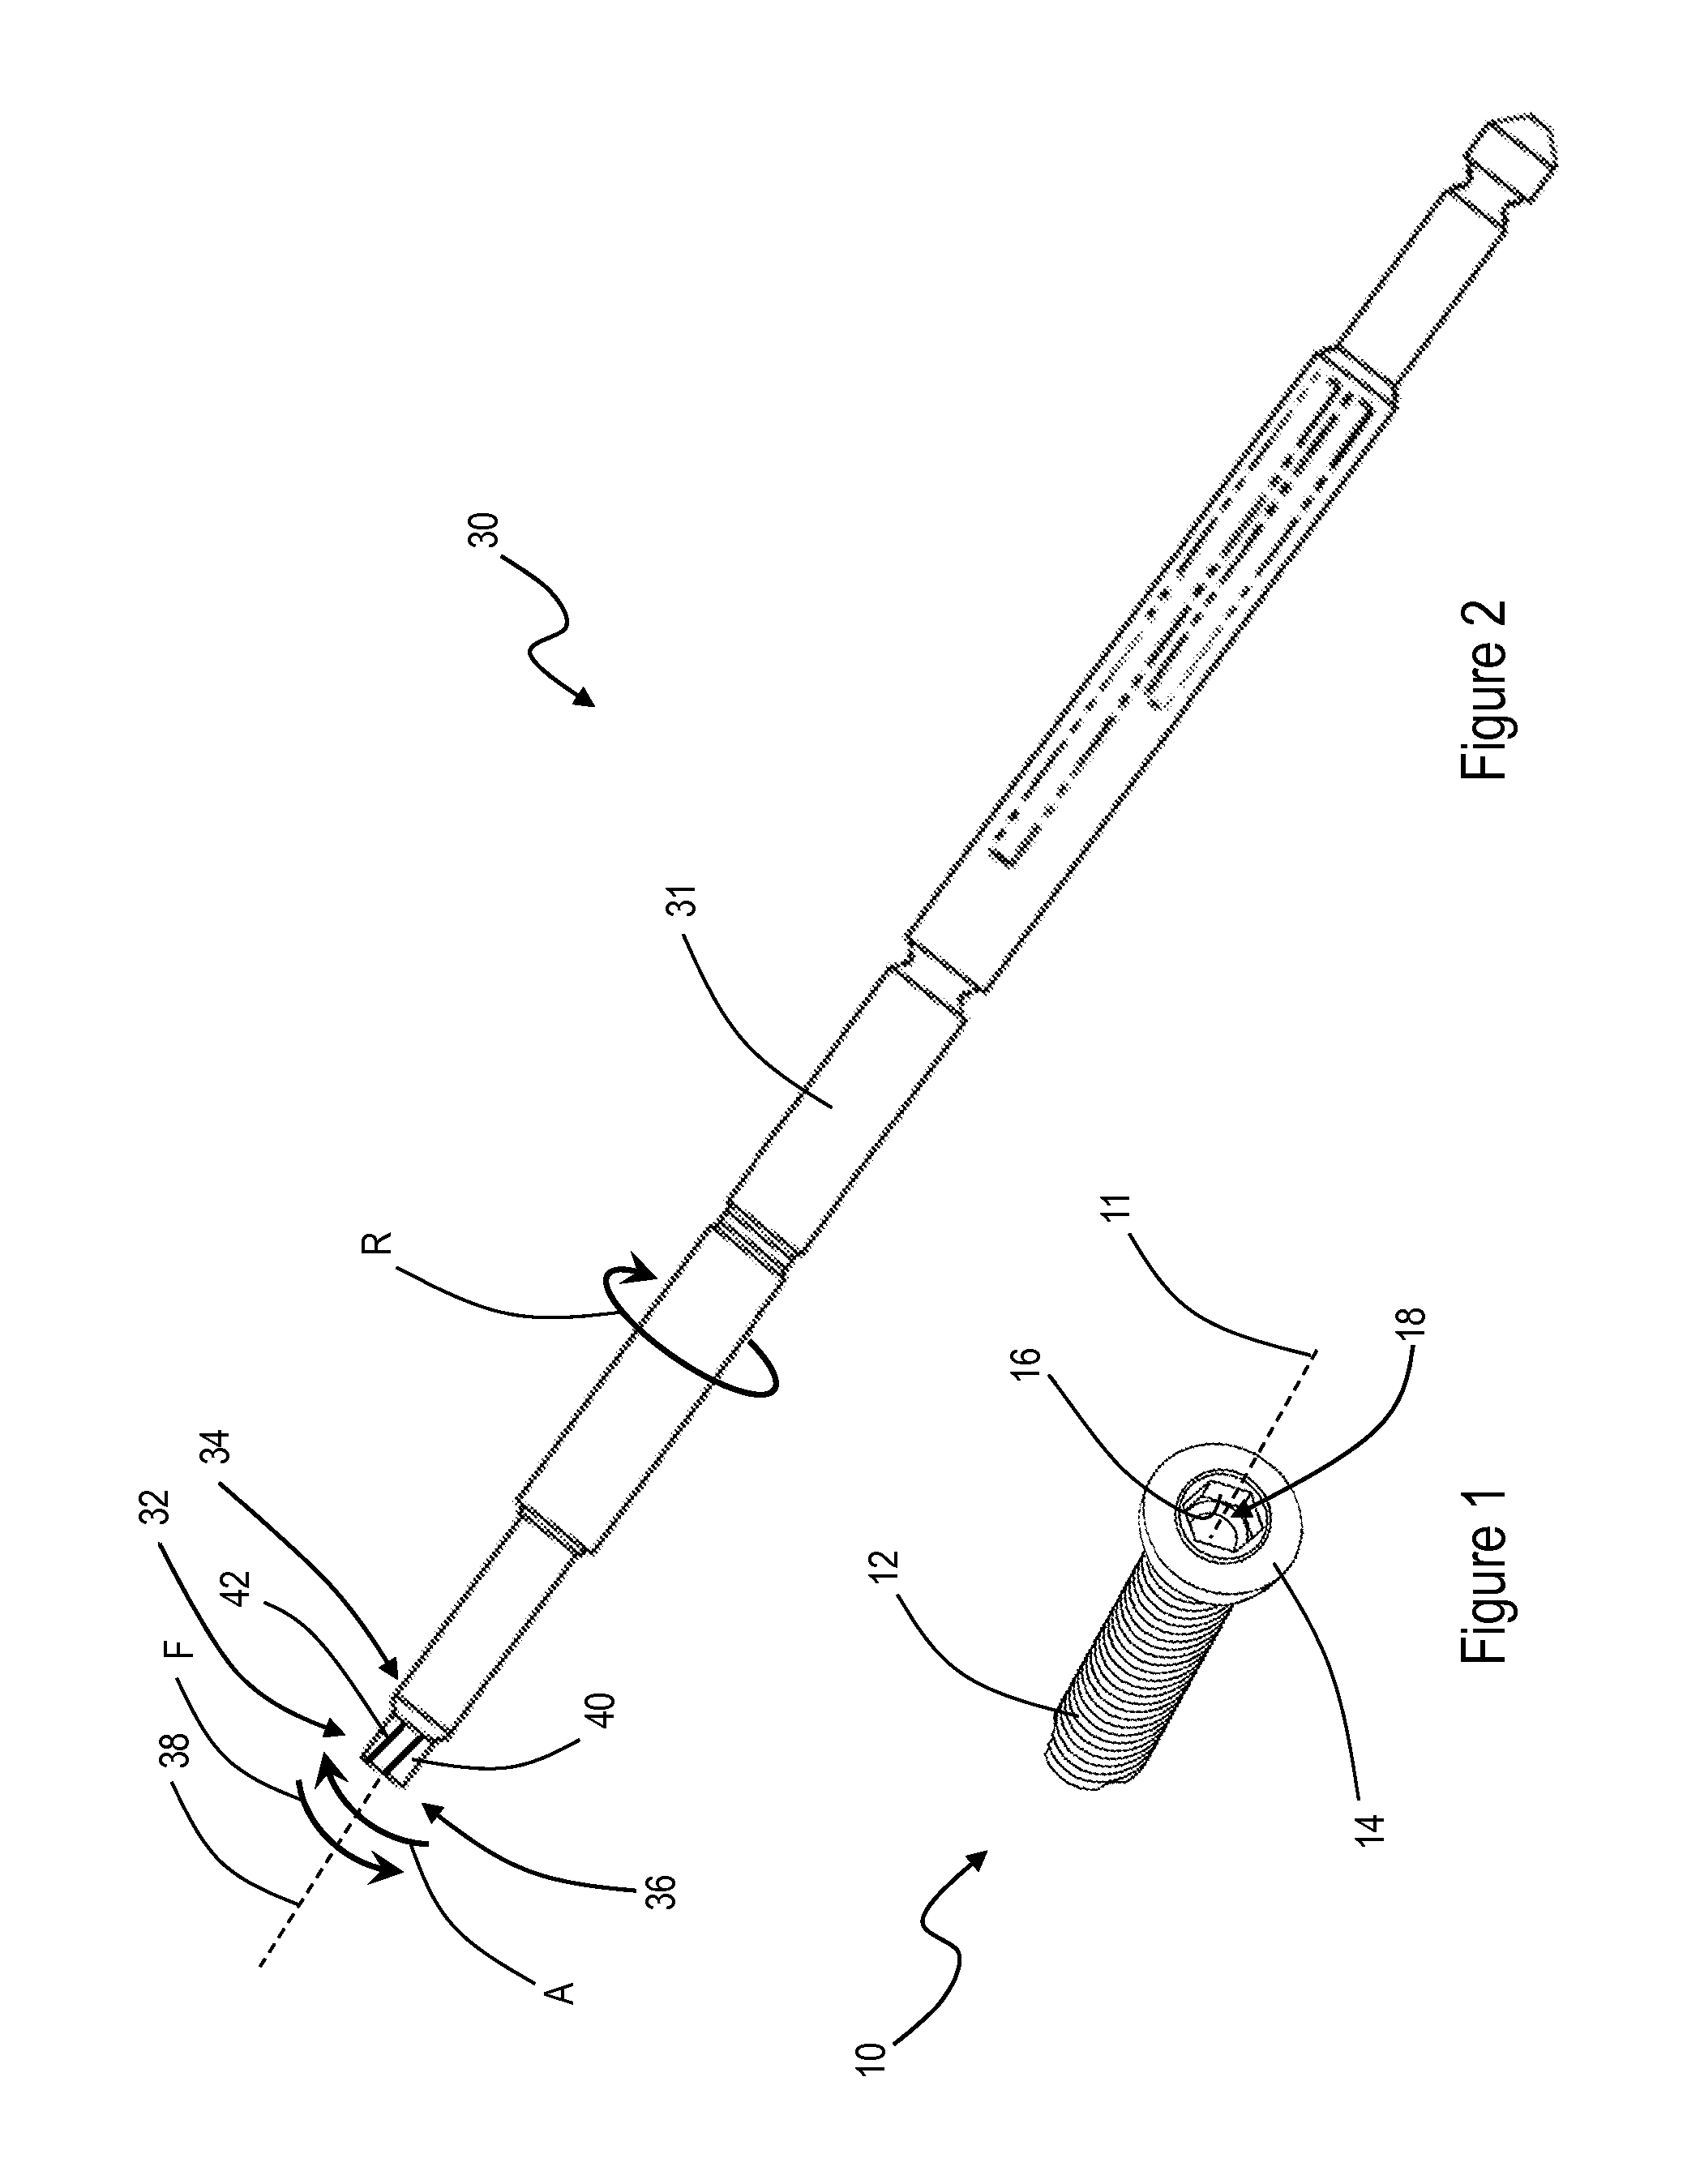 Locking screw driver with increased torsional strength